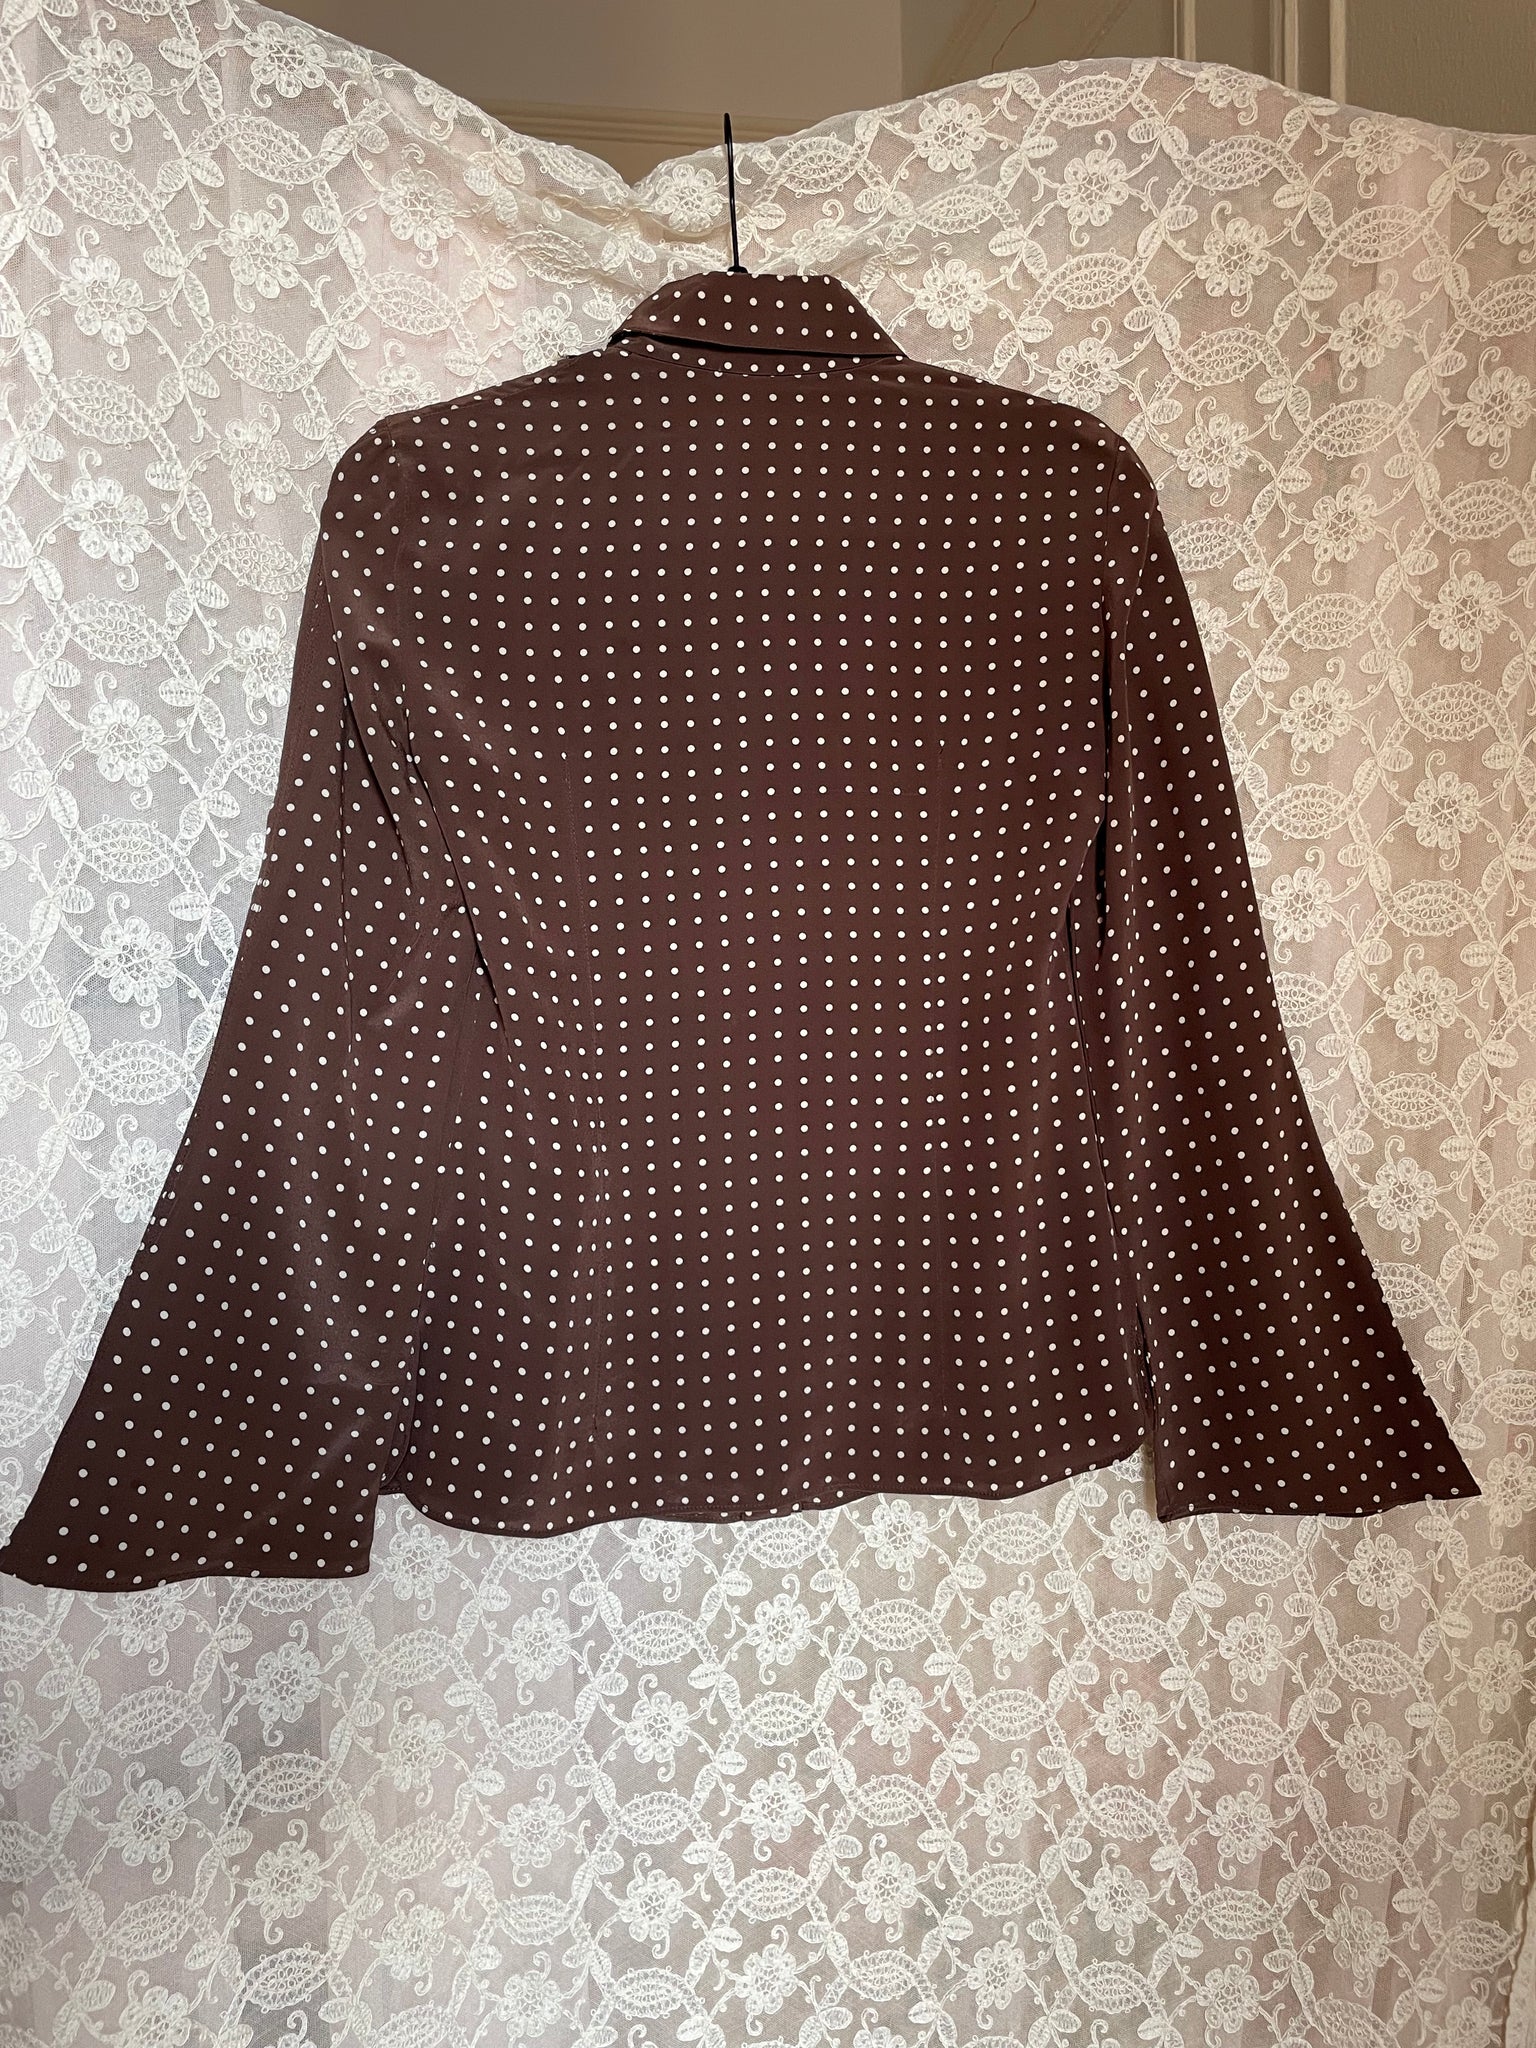 1990s Valentino Silk Brown White Dotted Blouse Bell Sleeves Ruffle Lace Jabot Button up